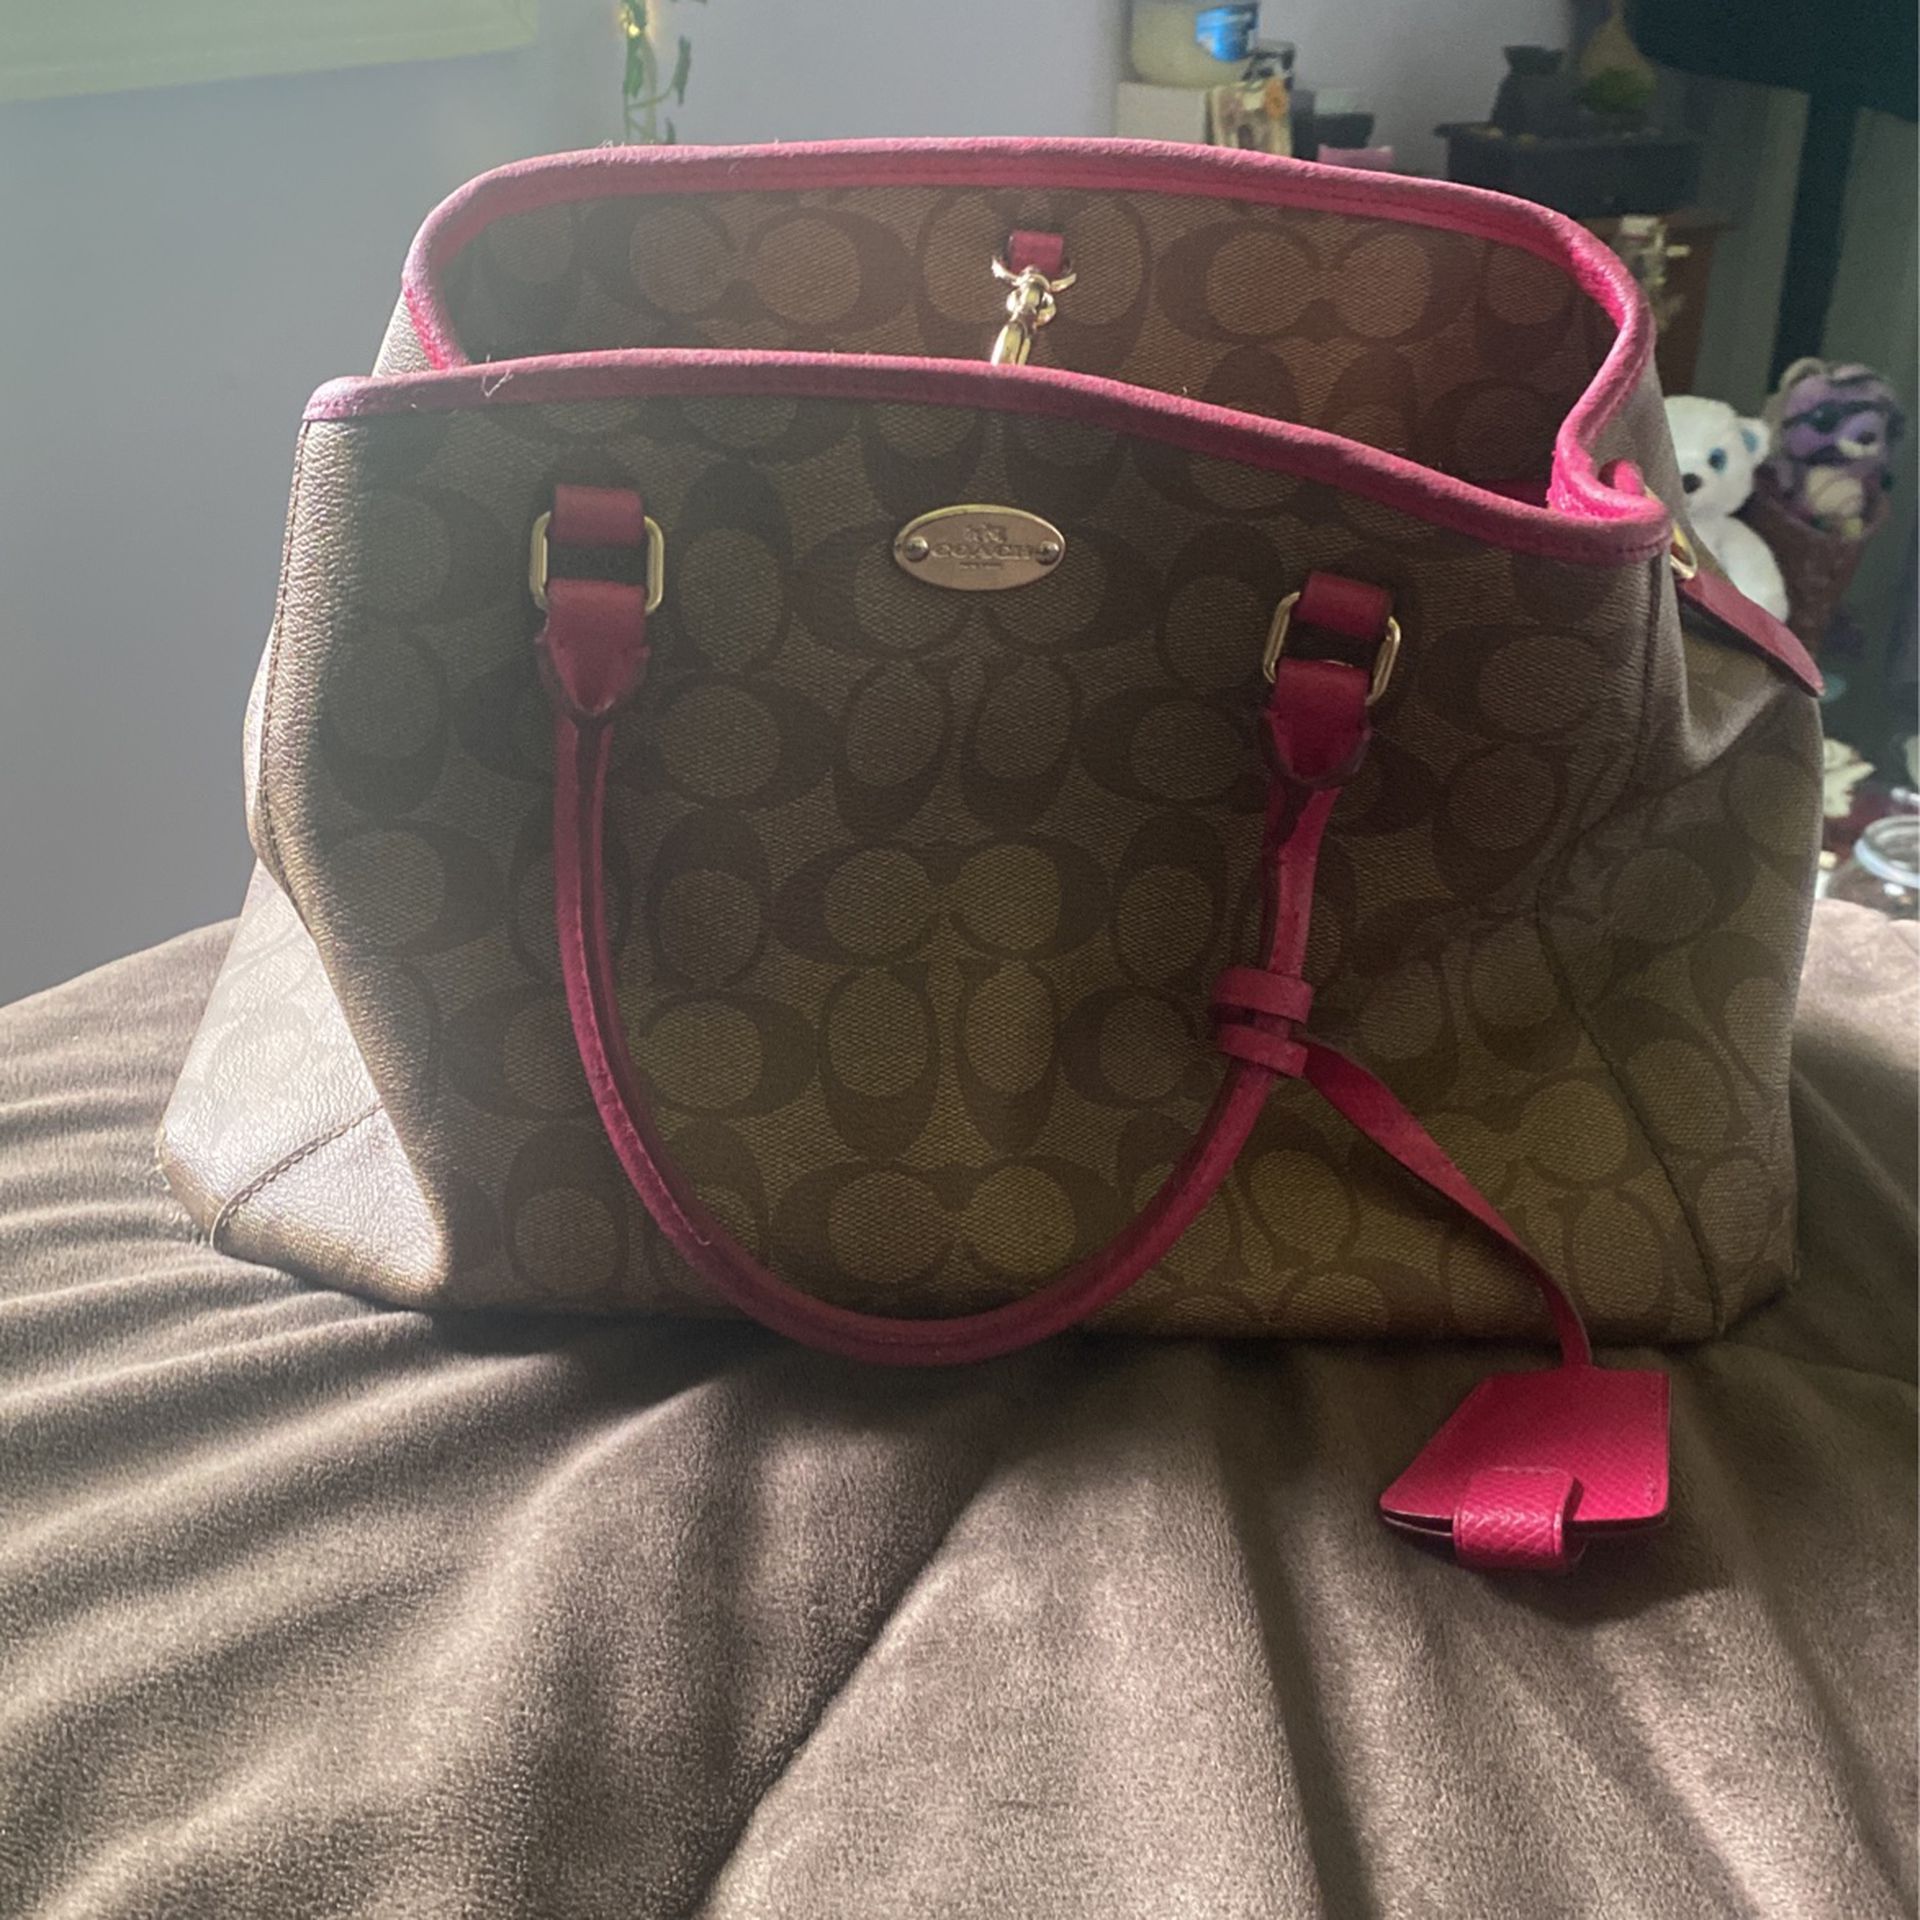 Pink Leather Coach Bag